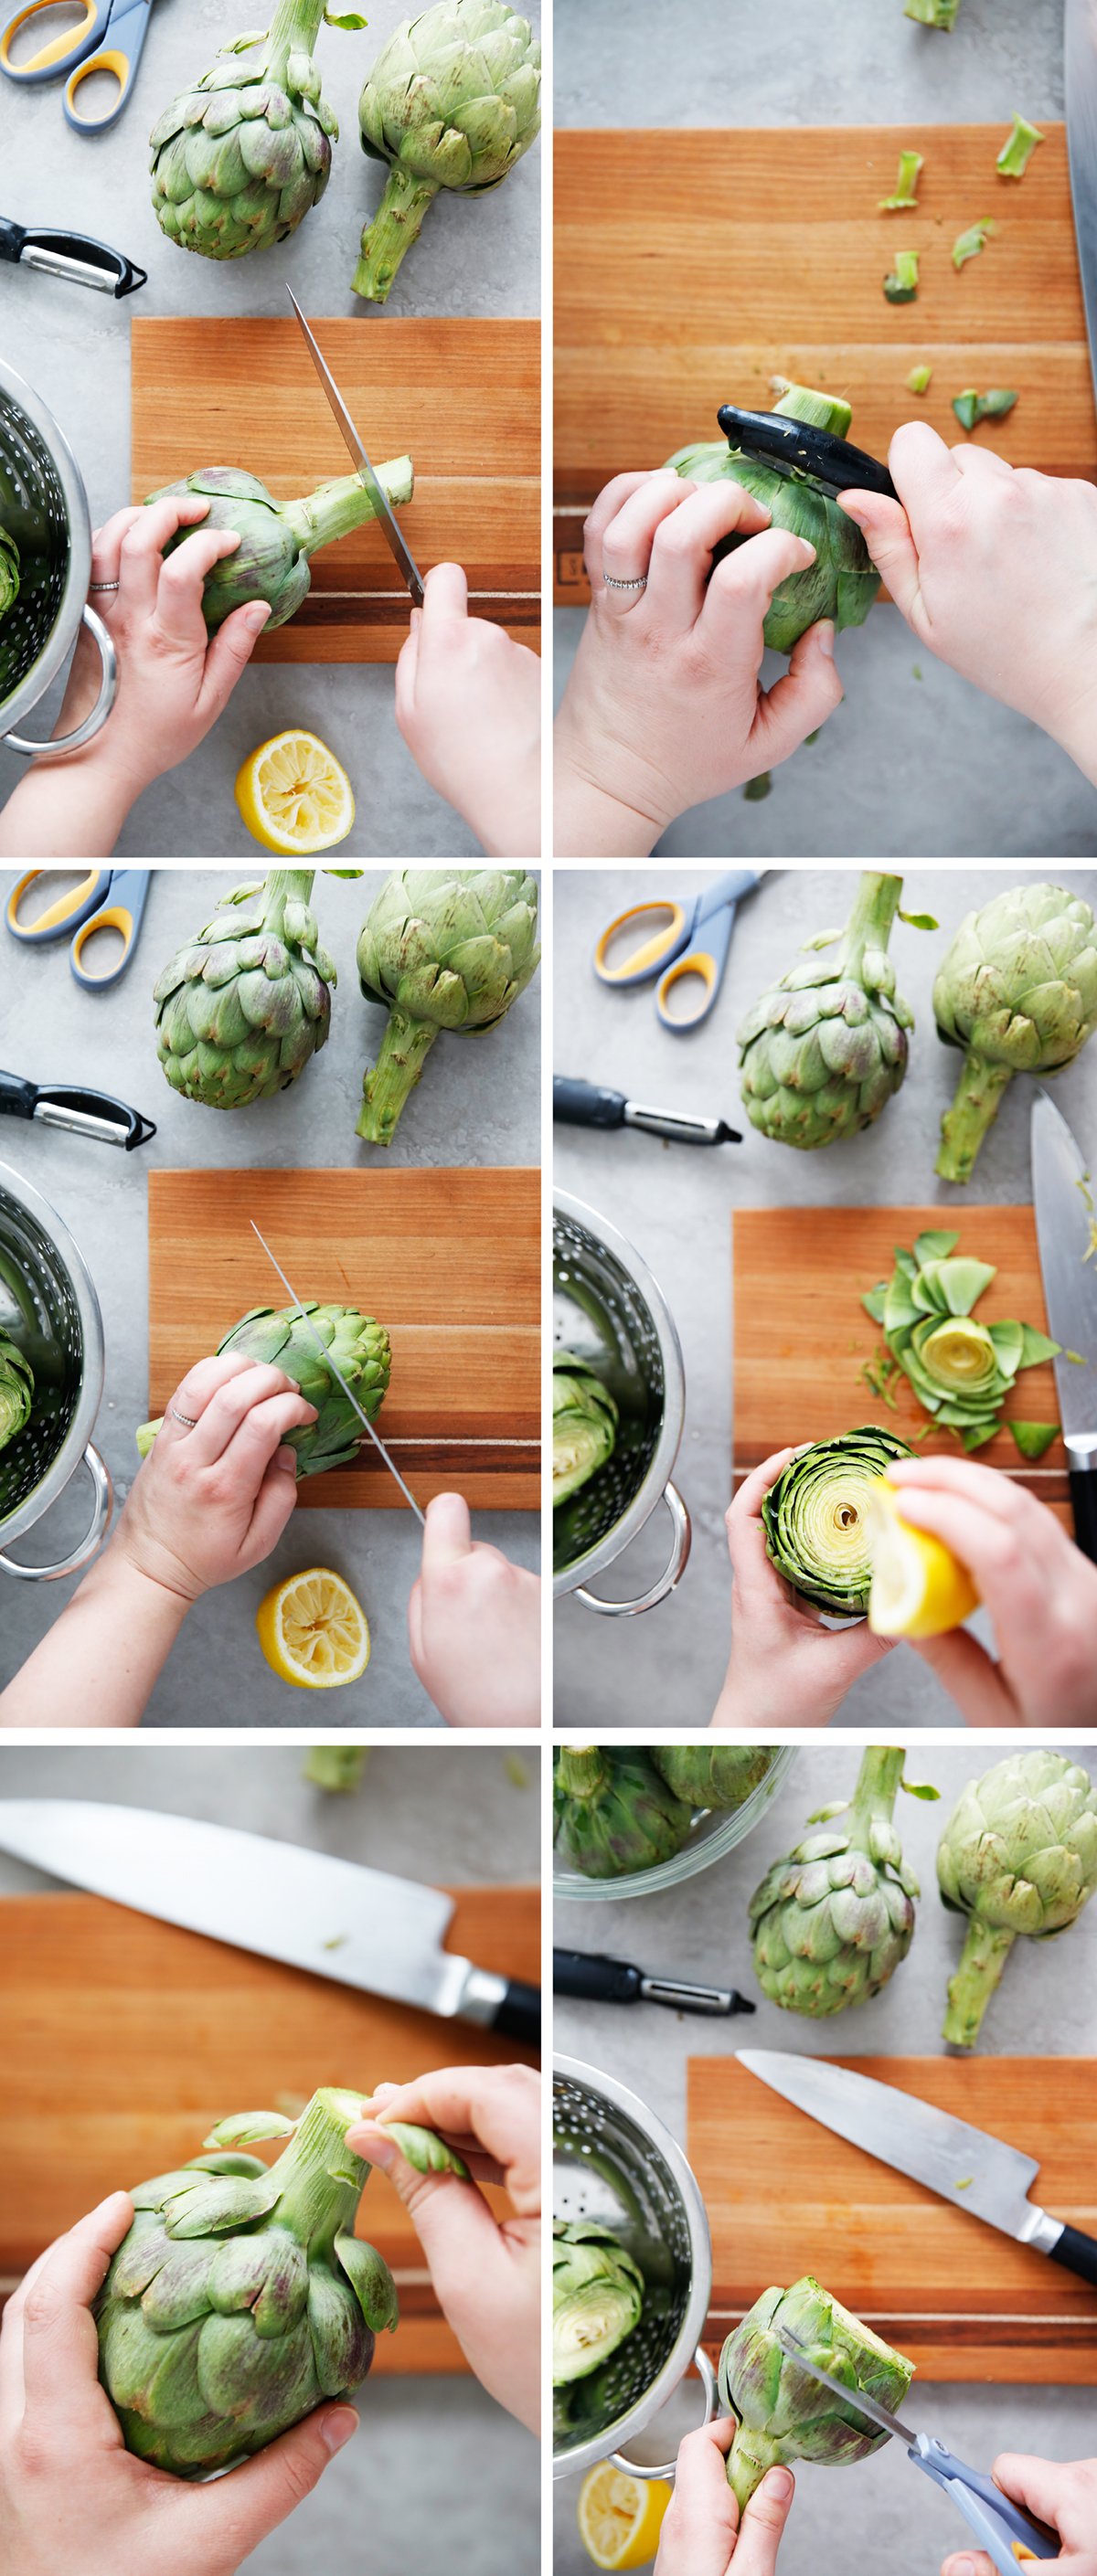 Step by step on How To Prepare Artichokes